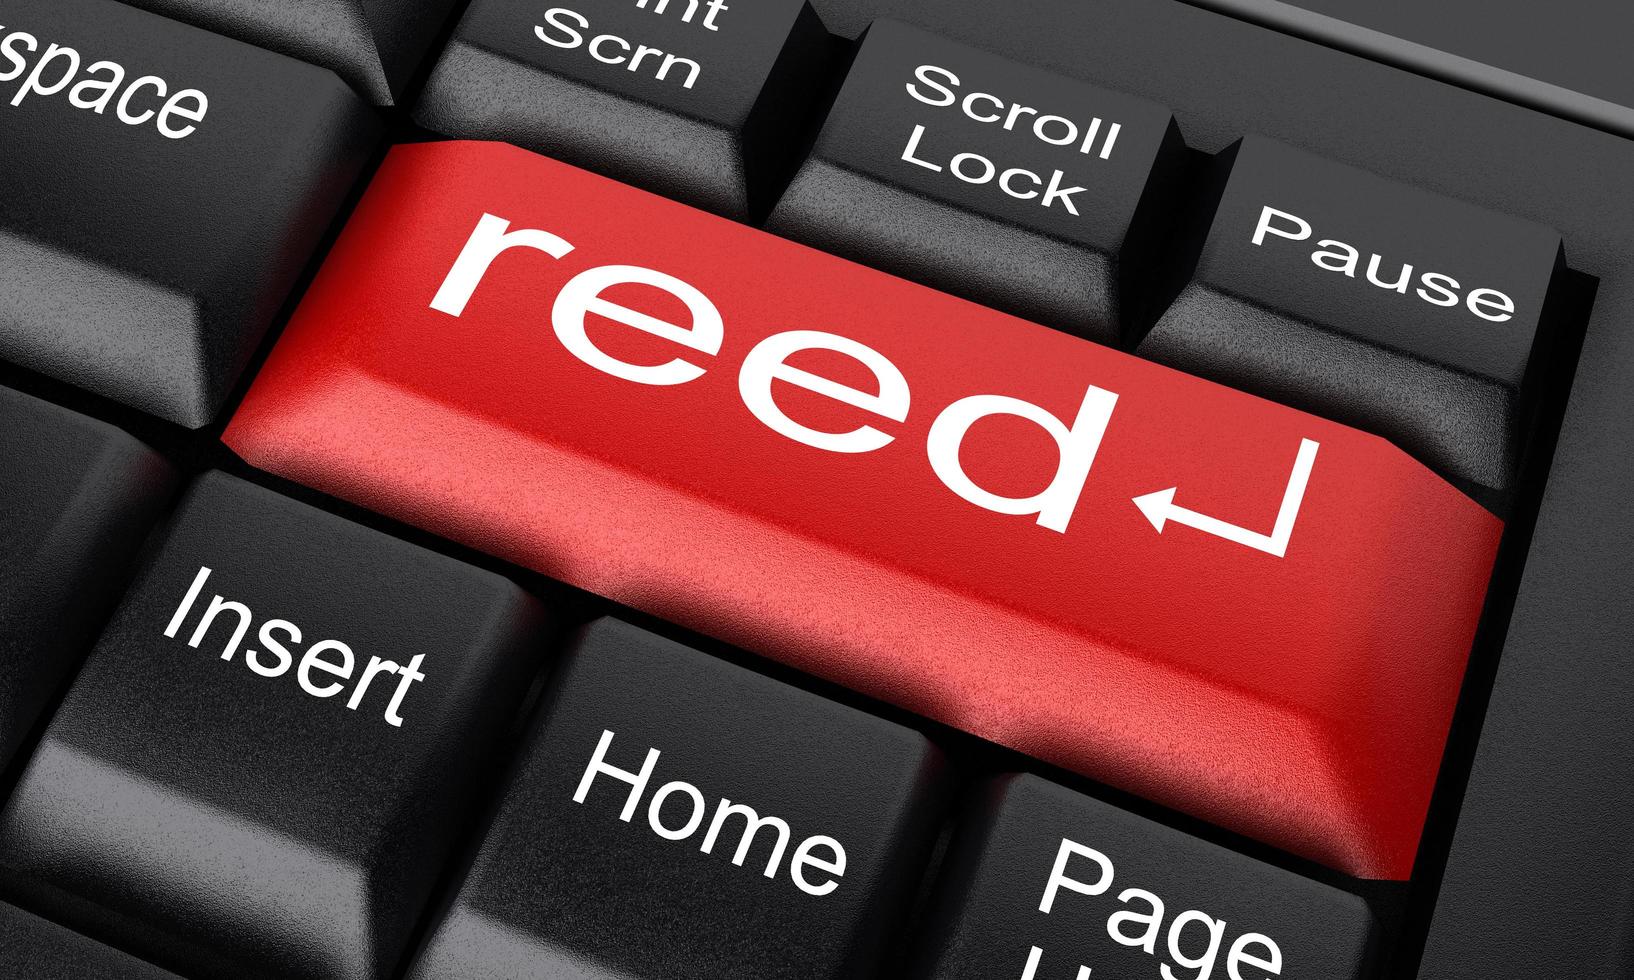 reed word on red keyboard button photo